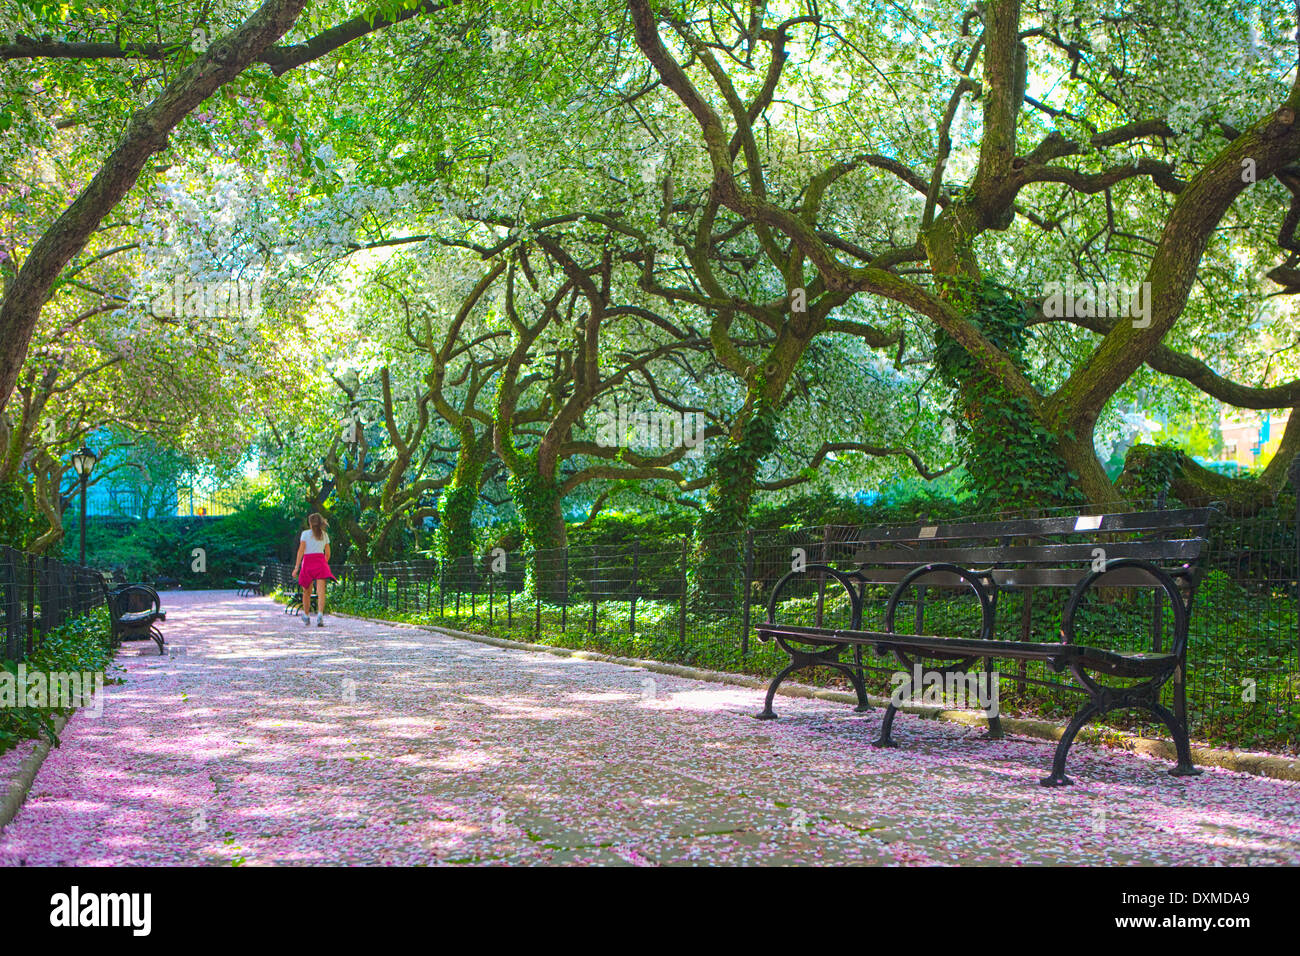 Early Morning walk through Crabapple trees in blossom in the Central Park Conservatory, New York Stock Photo